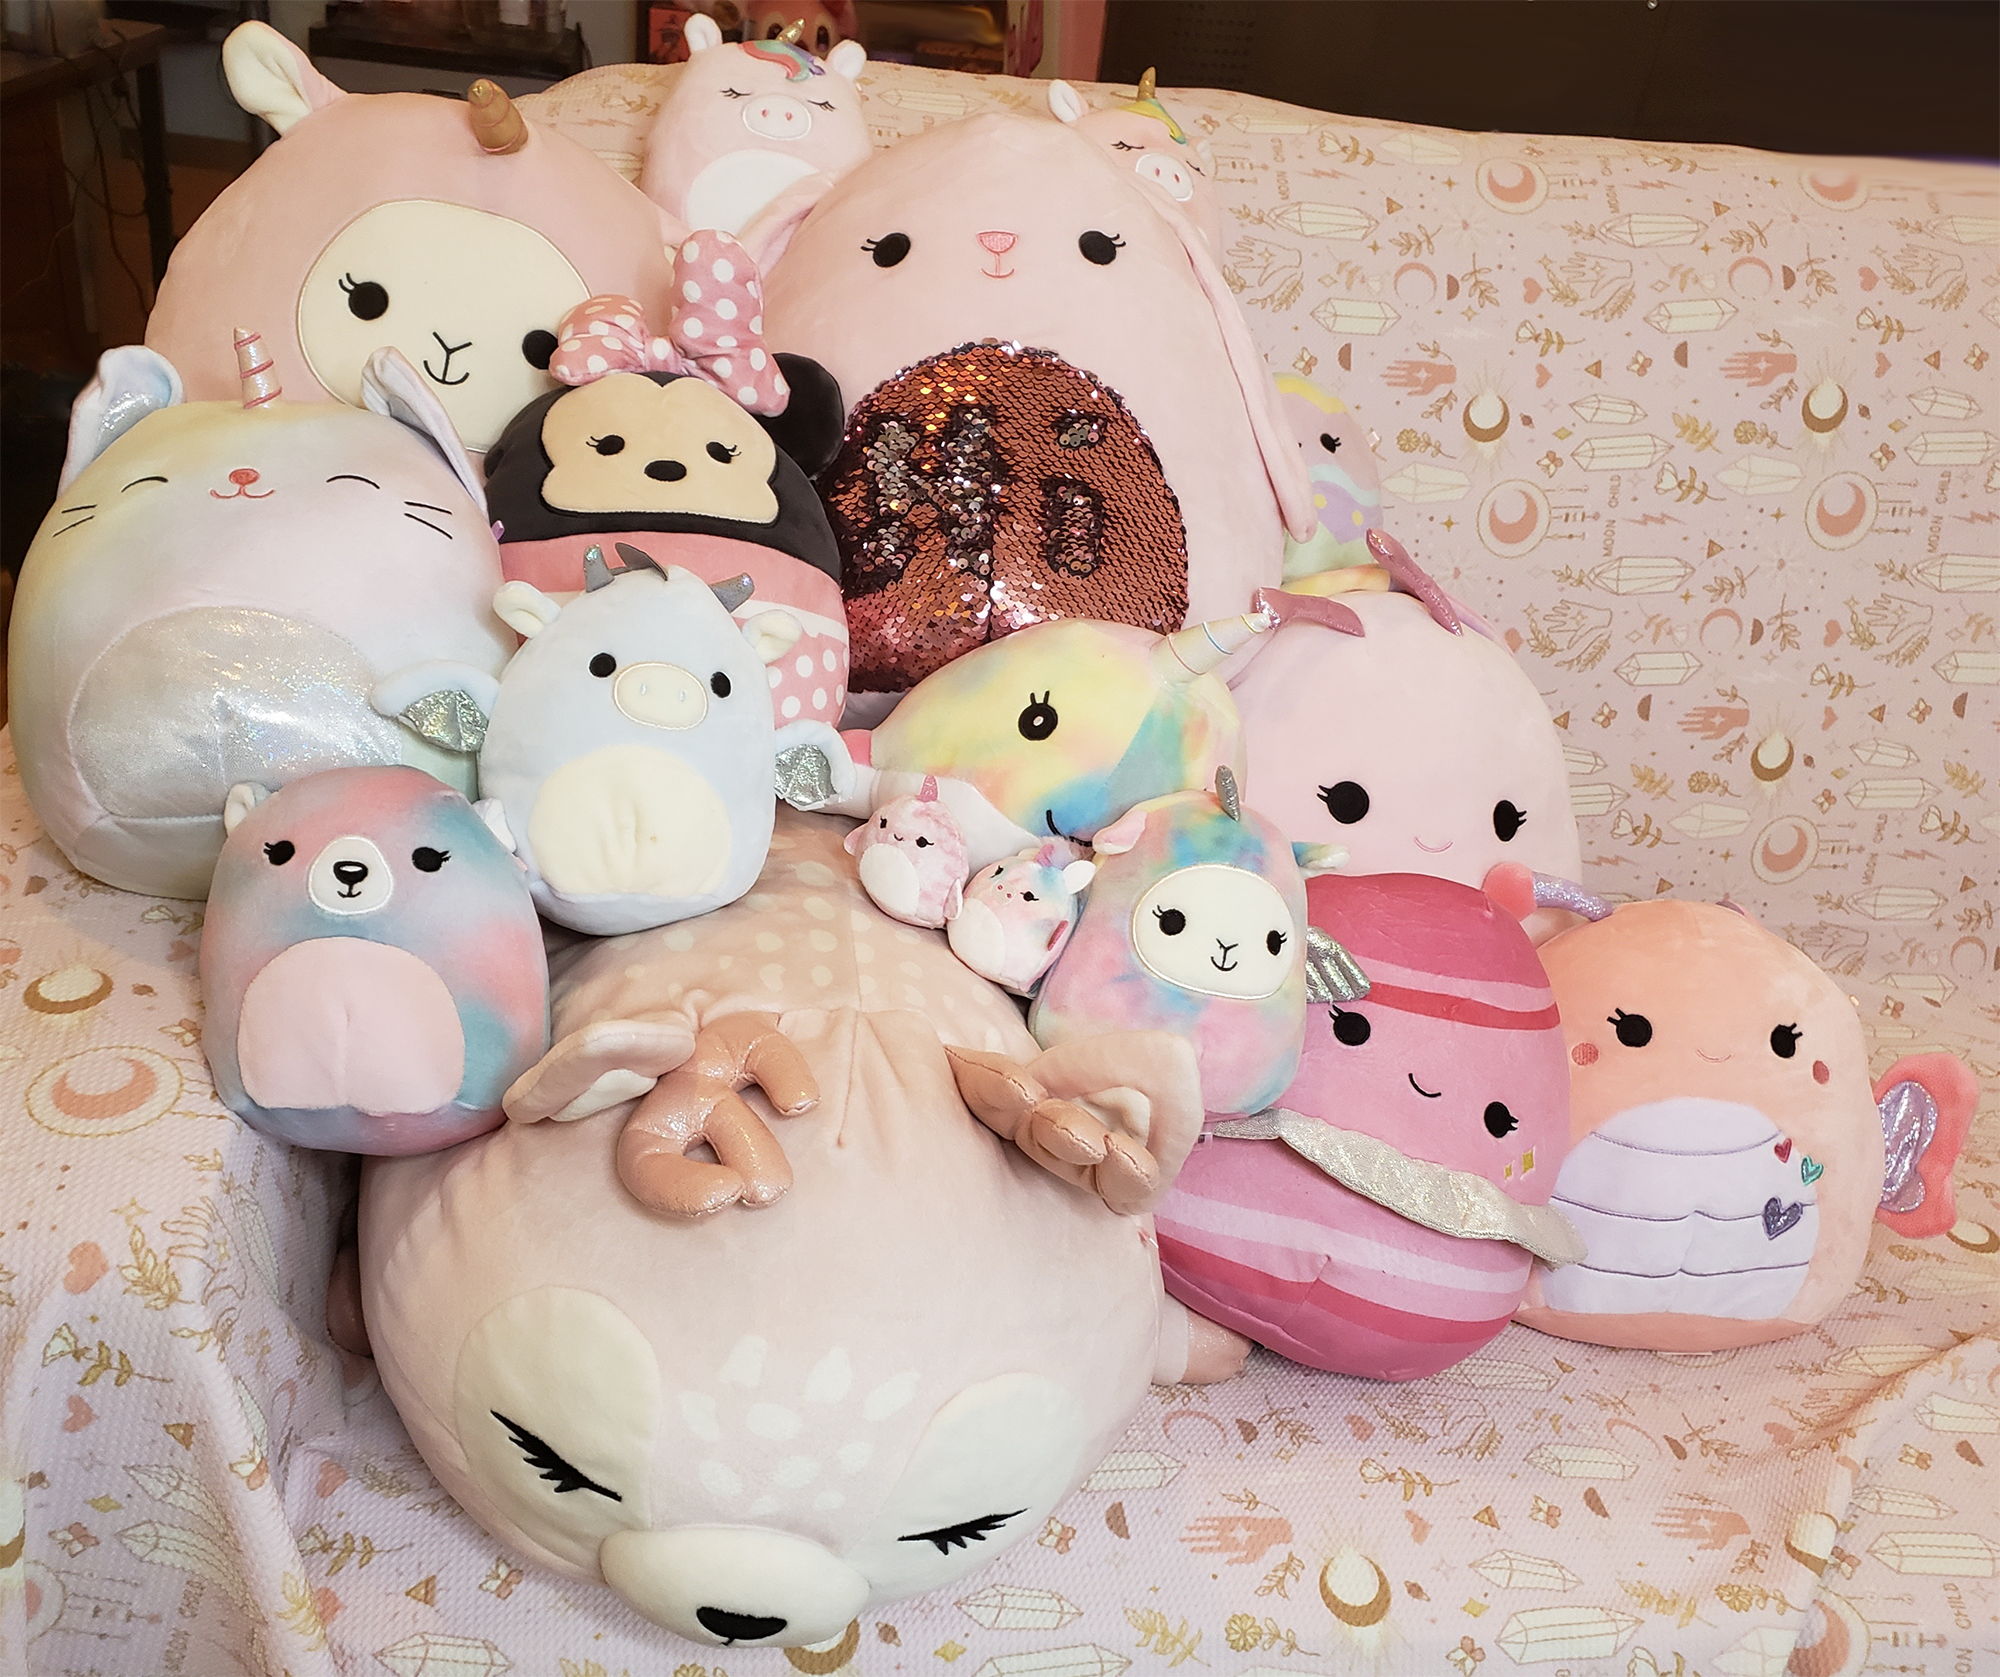 https://www.crystal-dreams.us/wp-content/uploads/2021/09/squishmallows2.png